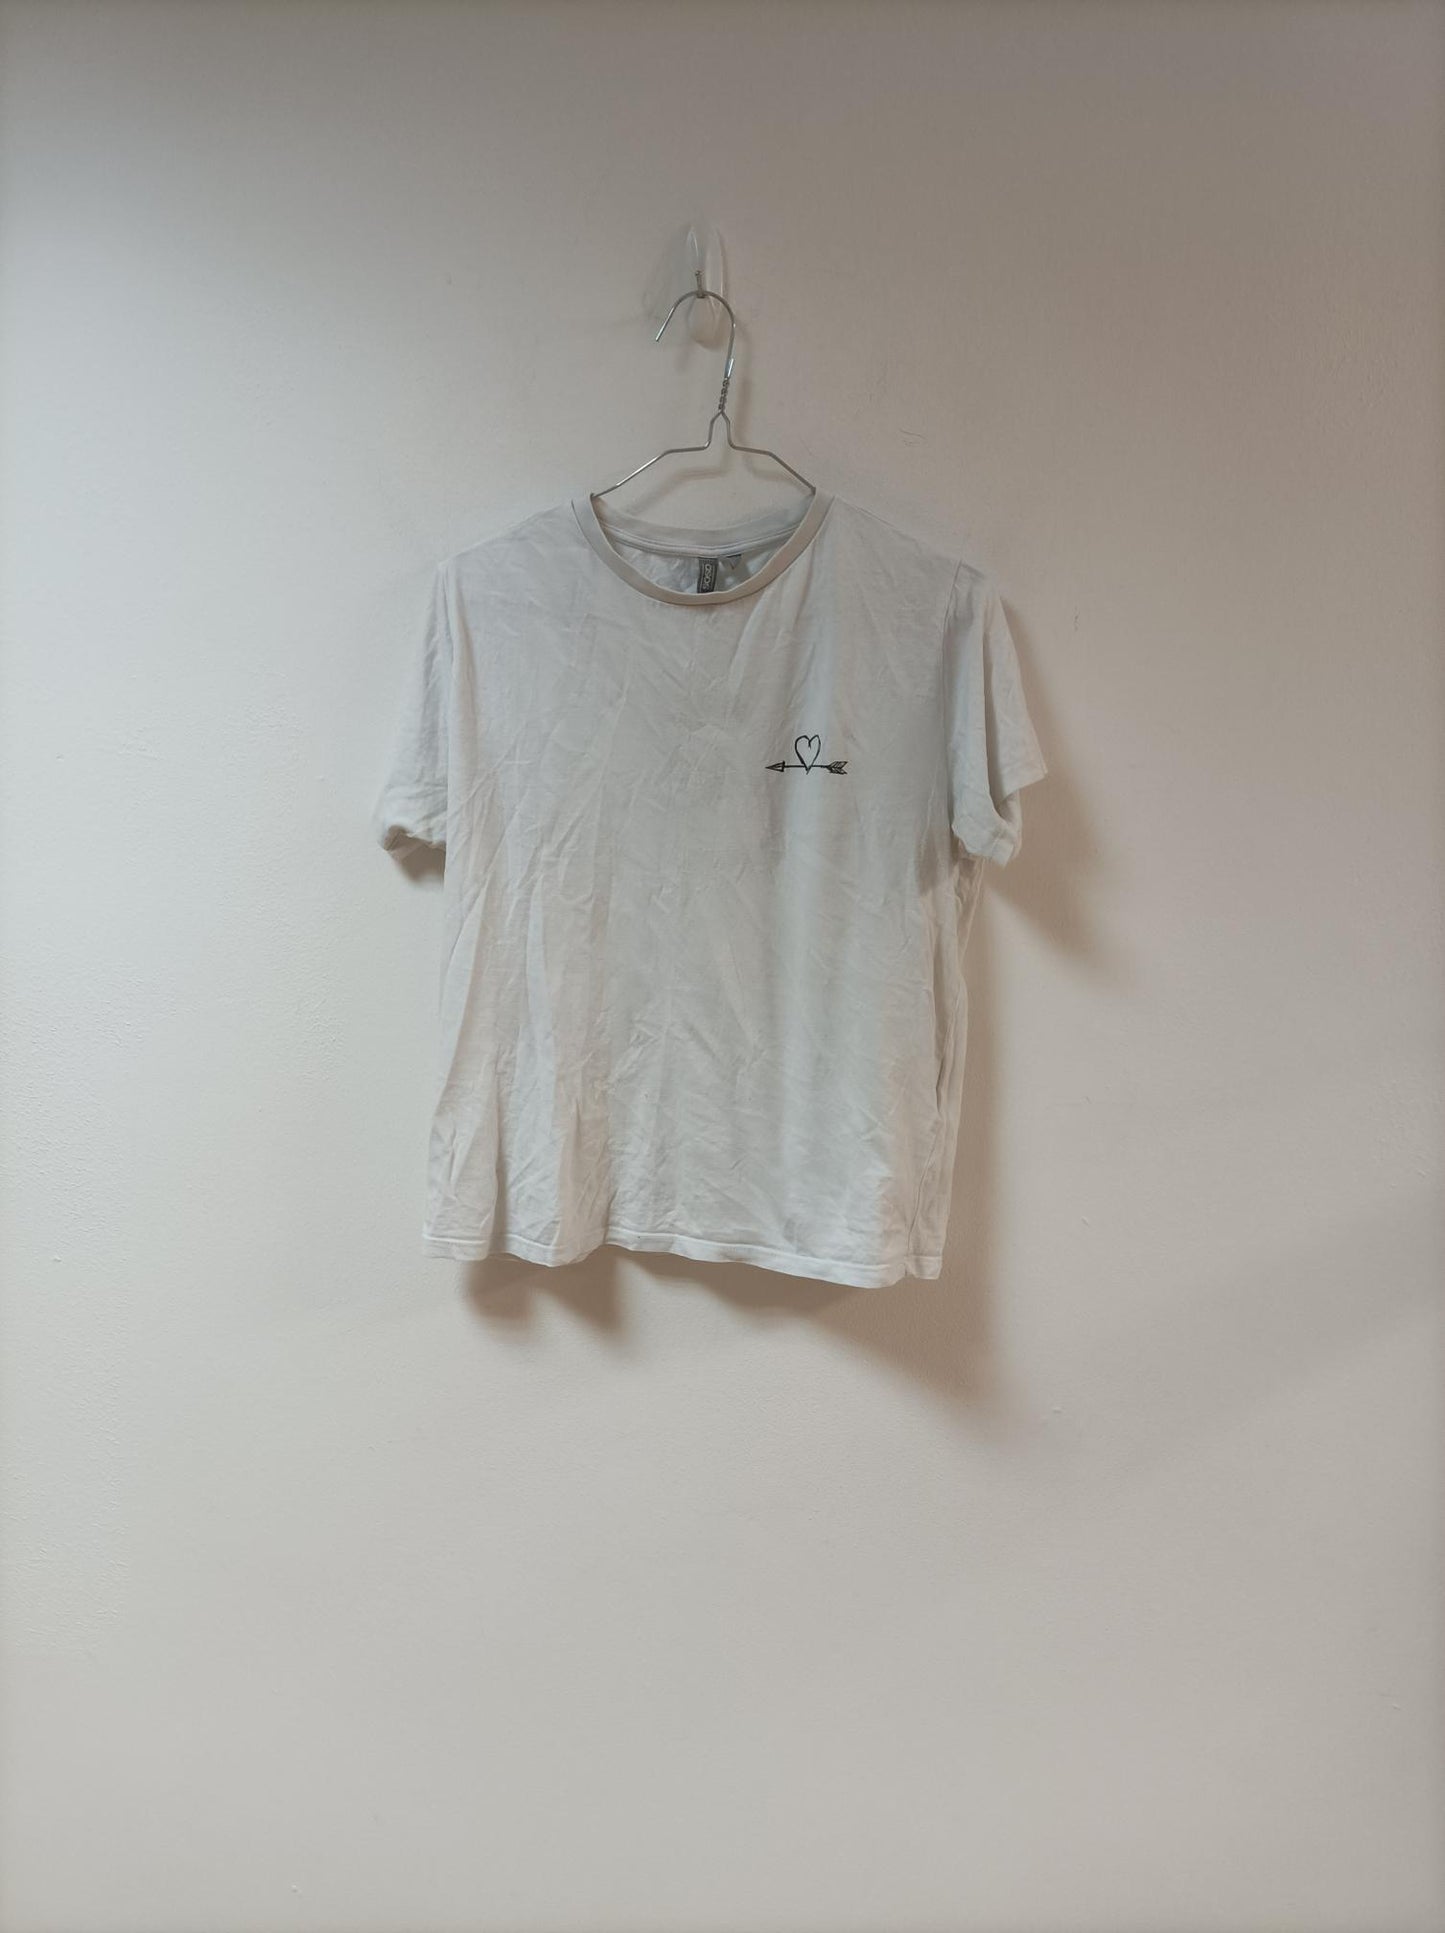 White small graphic heart and arrow t-shirt, ASOS, size 10 - Damaged Item Sale